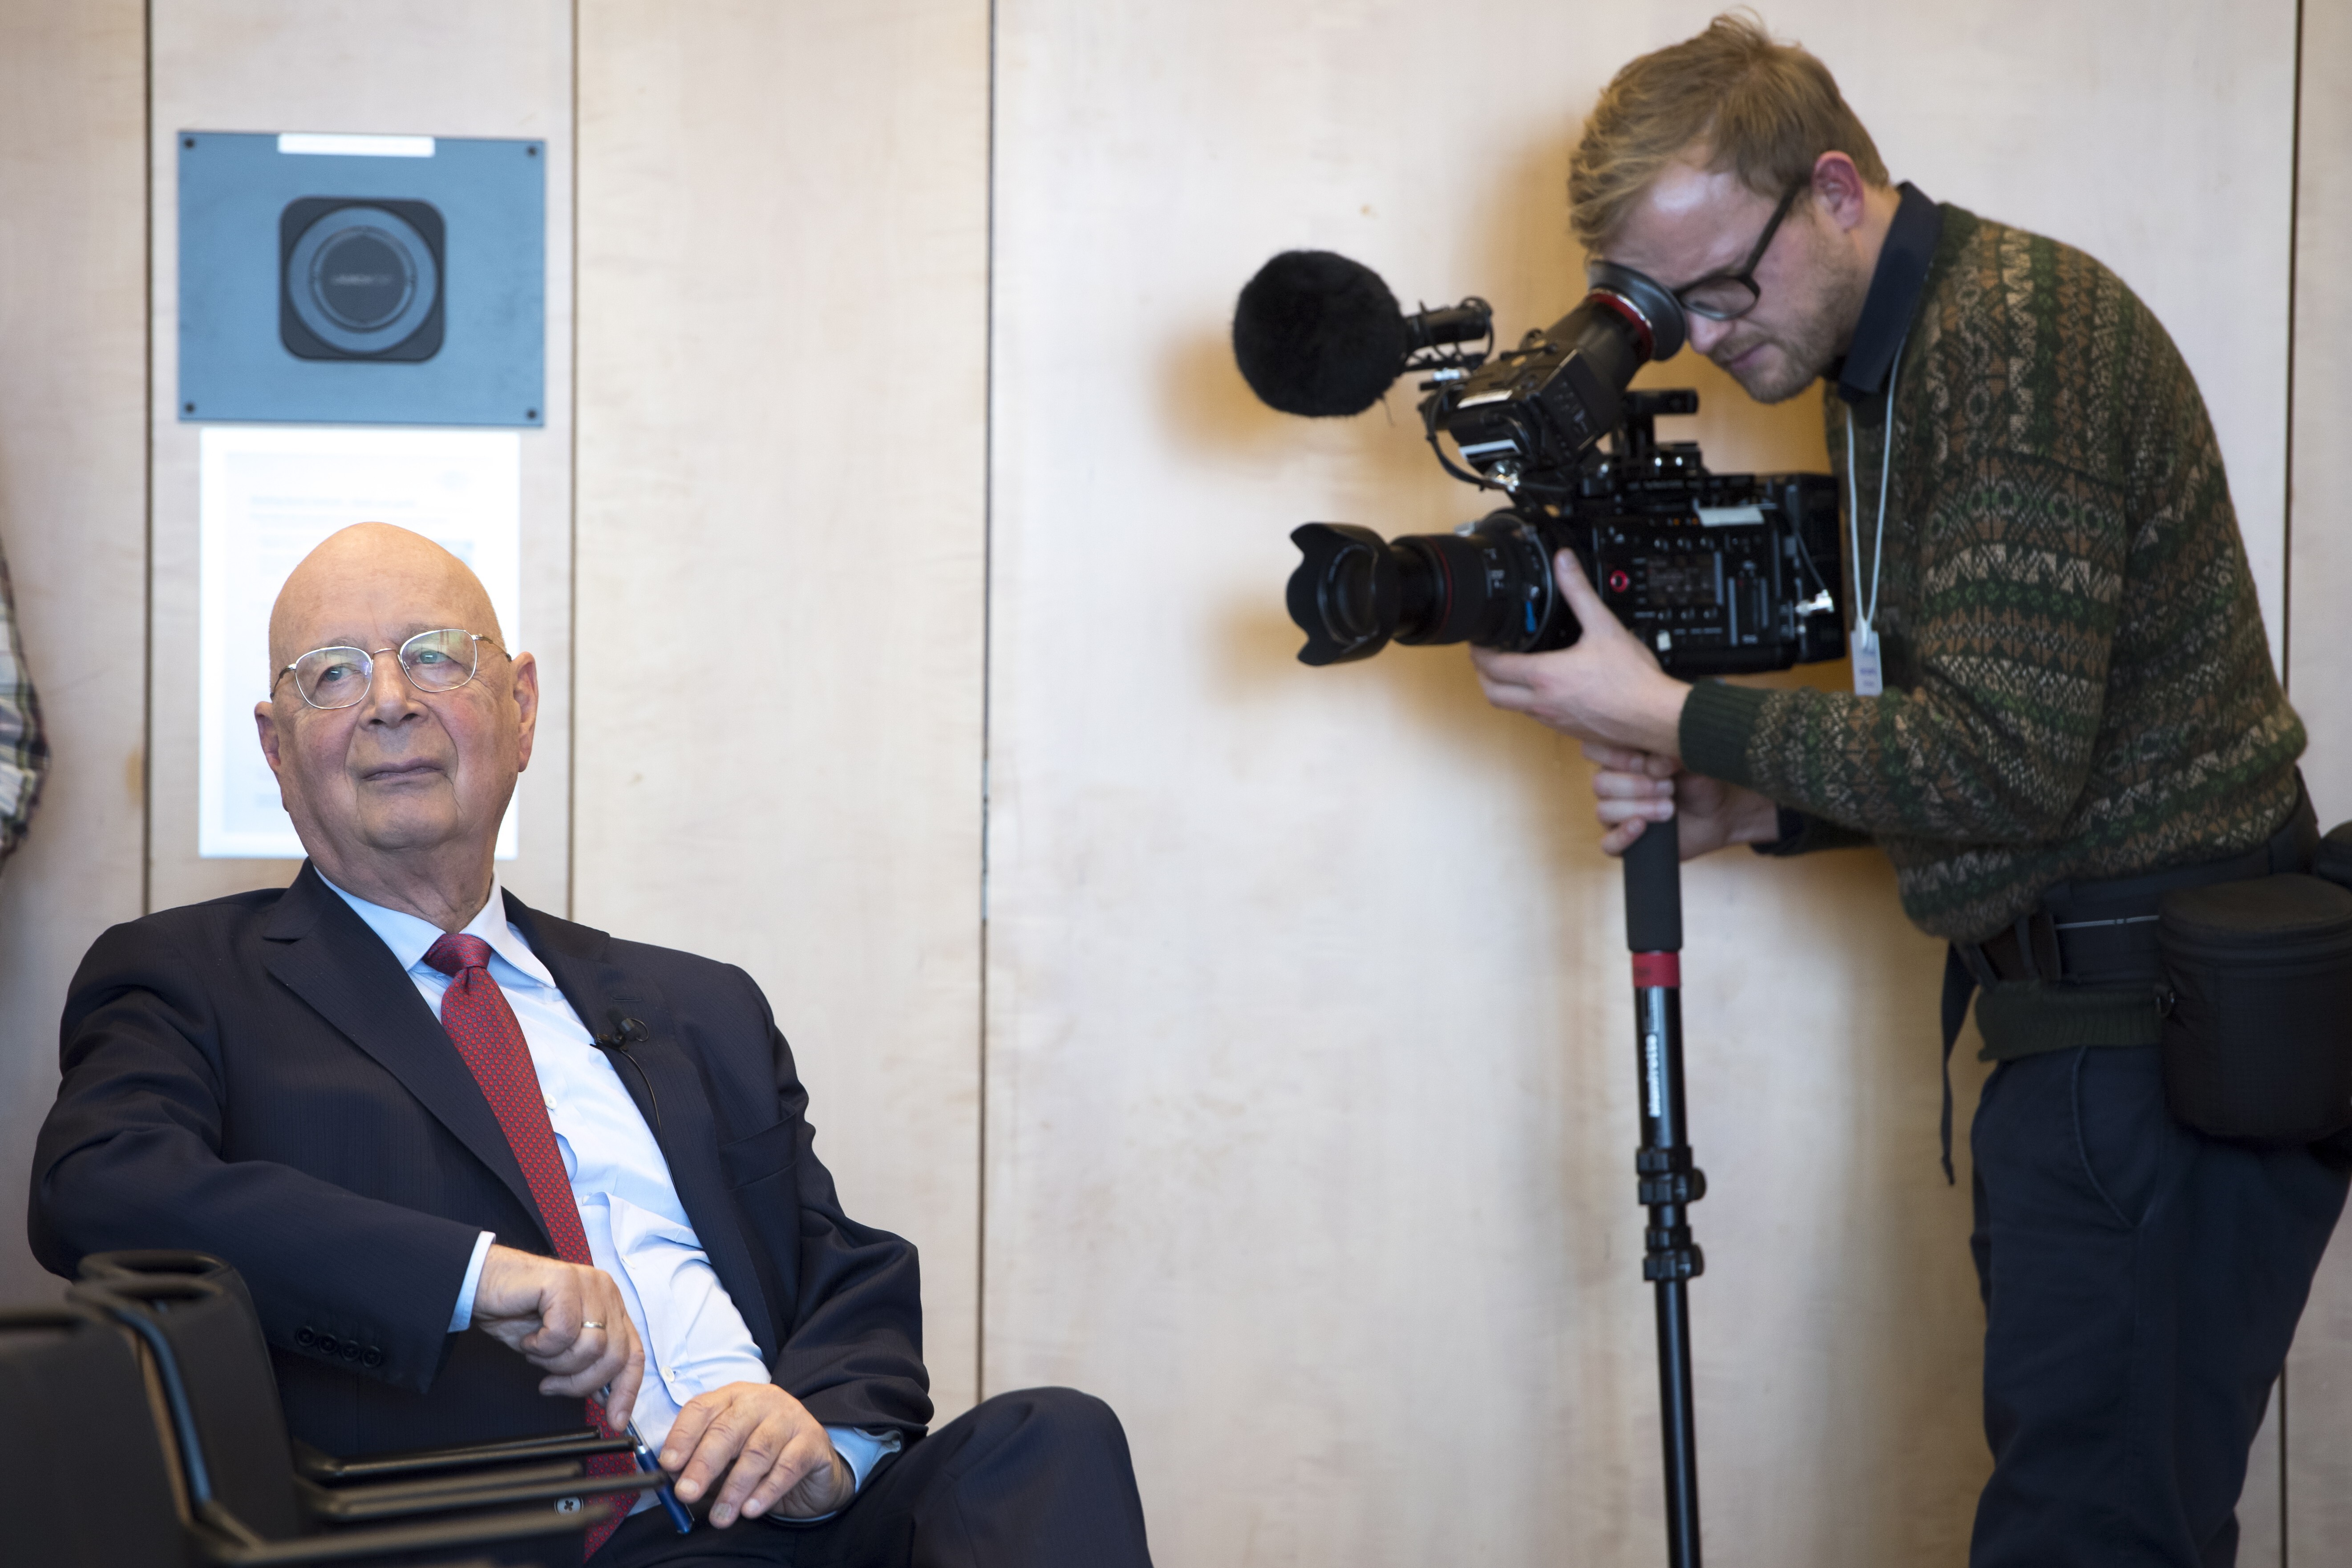 Klaus Schwab listens to a press conference in Cologny, near Geneva, last year. The World Economic Forum founder, and proponent of a “Great Reset”, says Asia may be “philosophically more prepared” for stakeholder capitalism. Photo: EPA-EFE